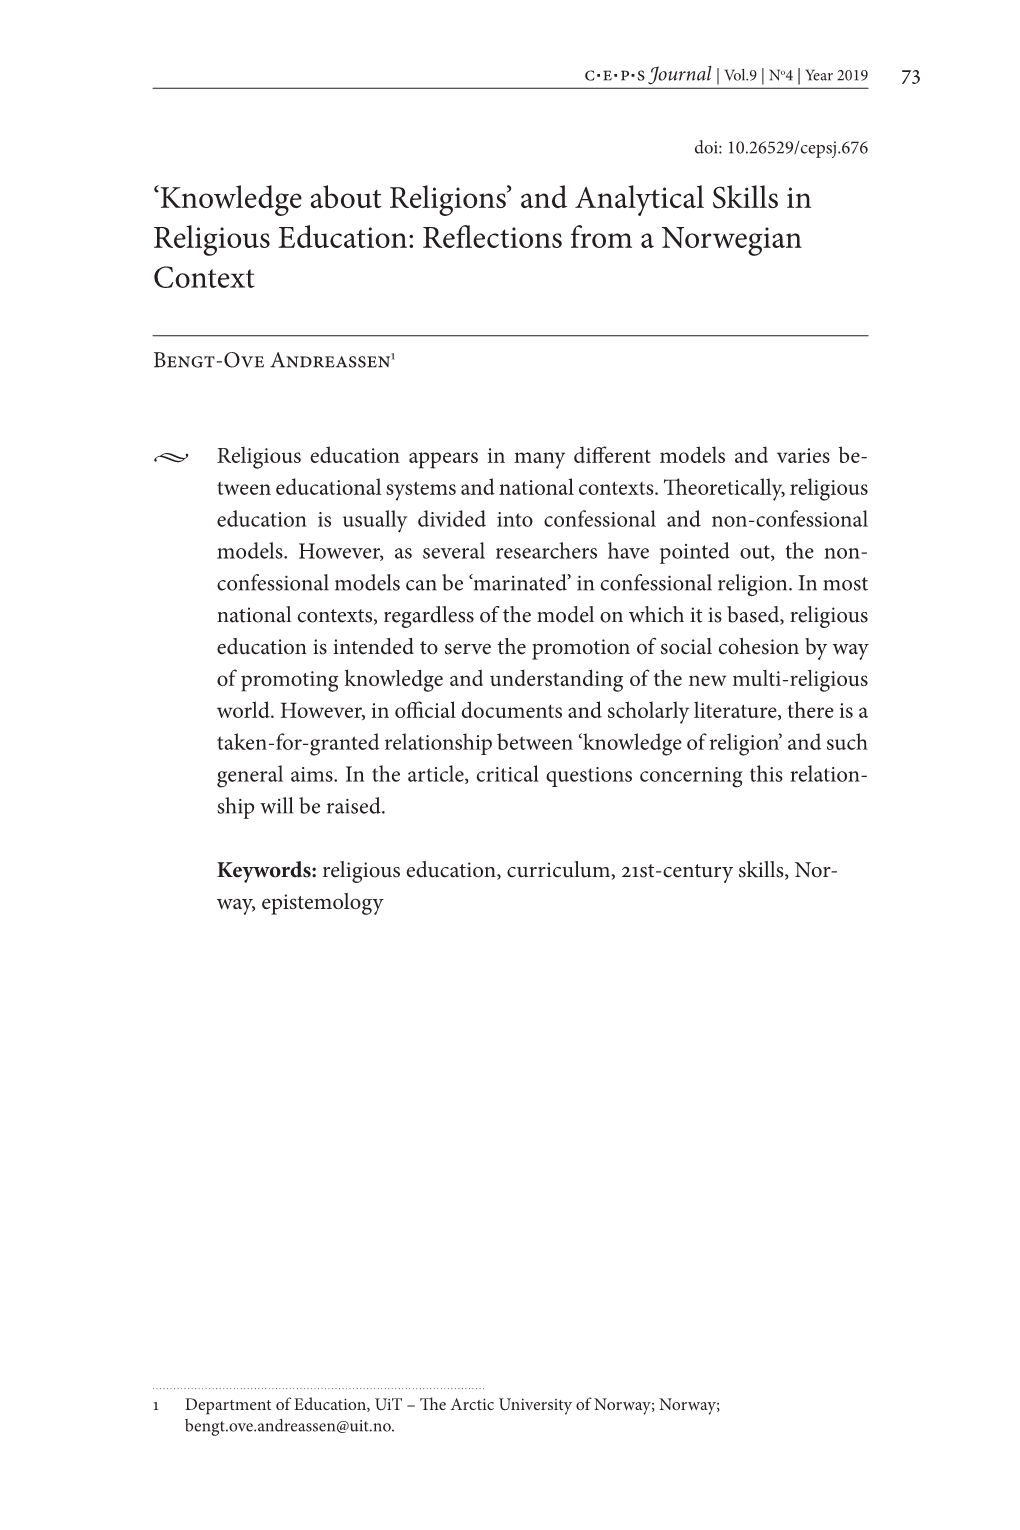 'Knowledge About Religions' and Analytical Skills in Religious Education